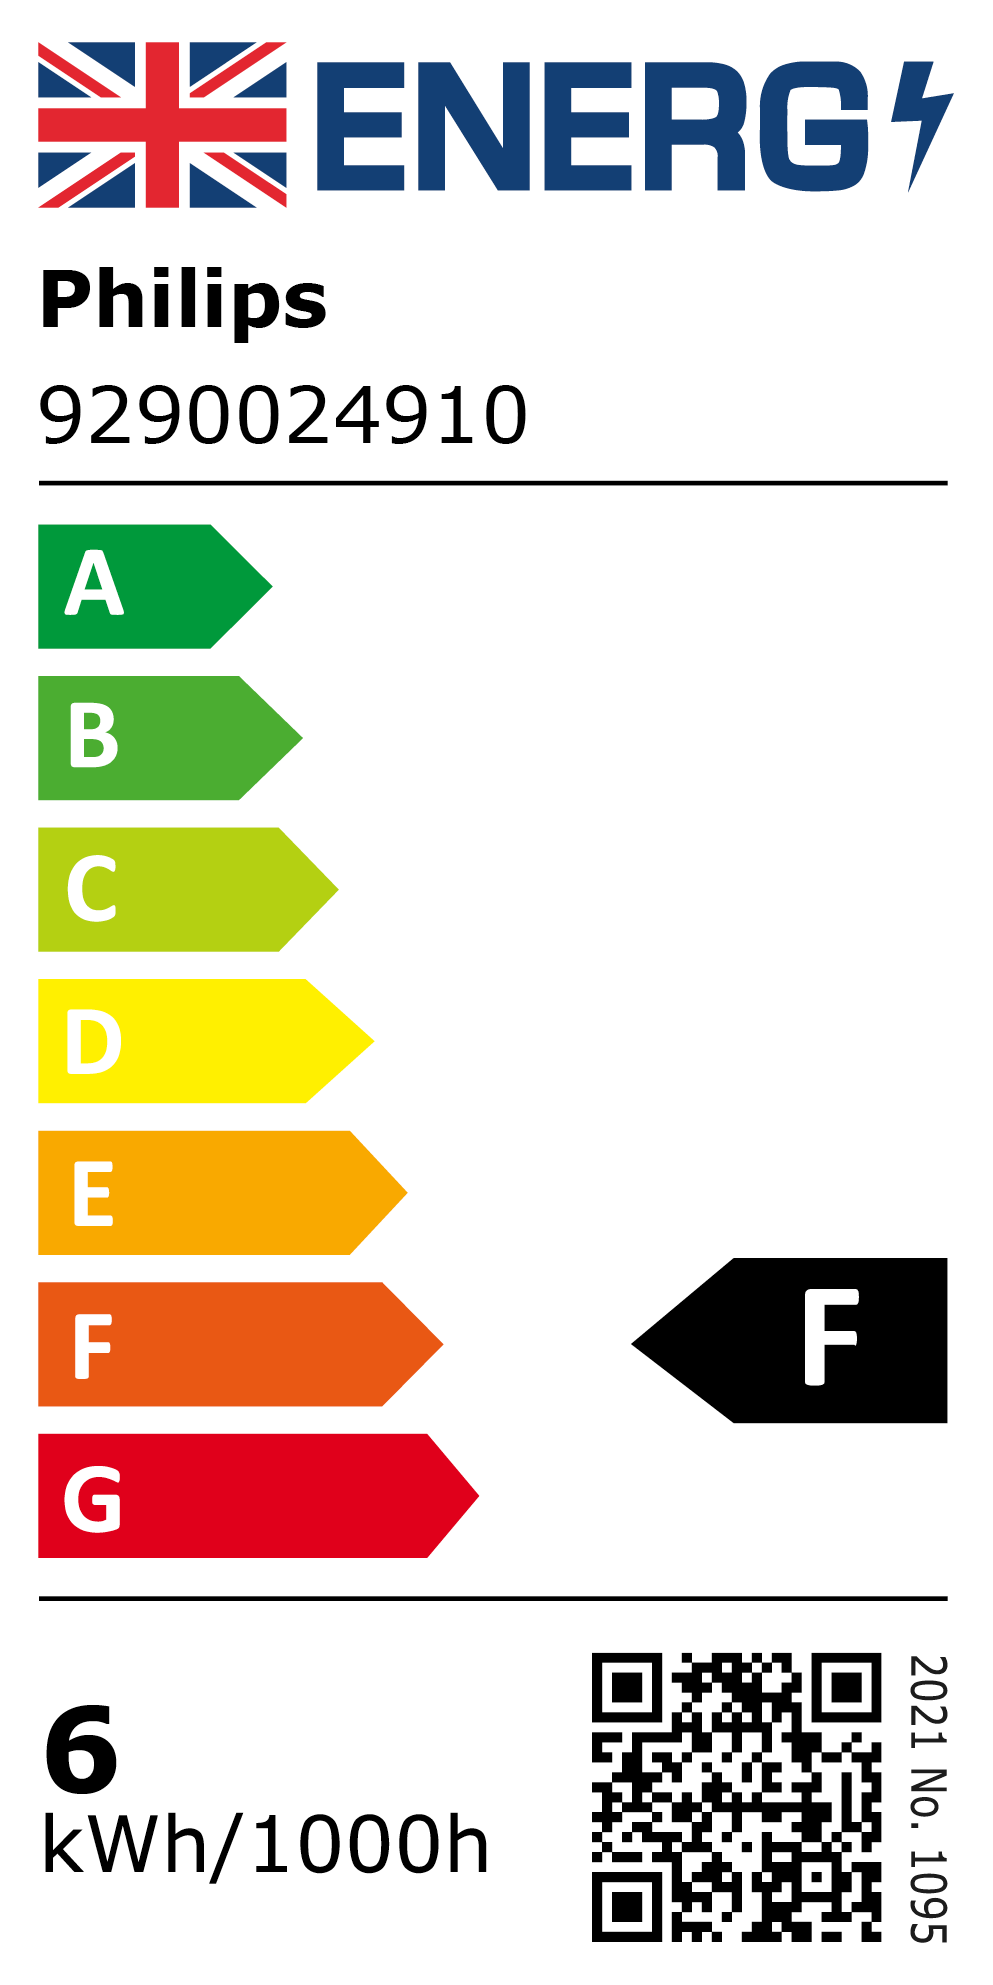 New 2021 Energy Rating Label: MPN 9290024910